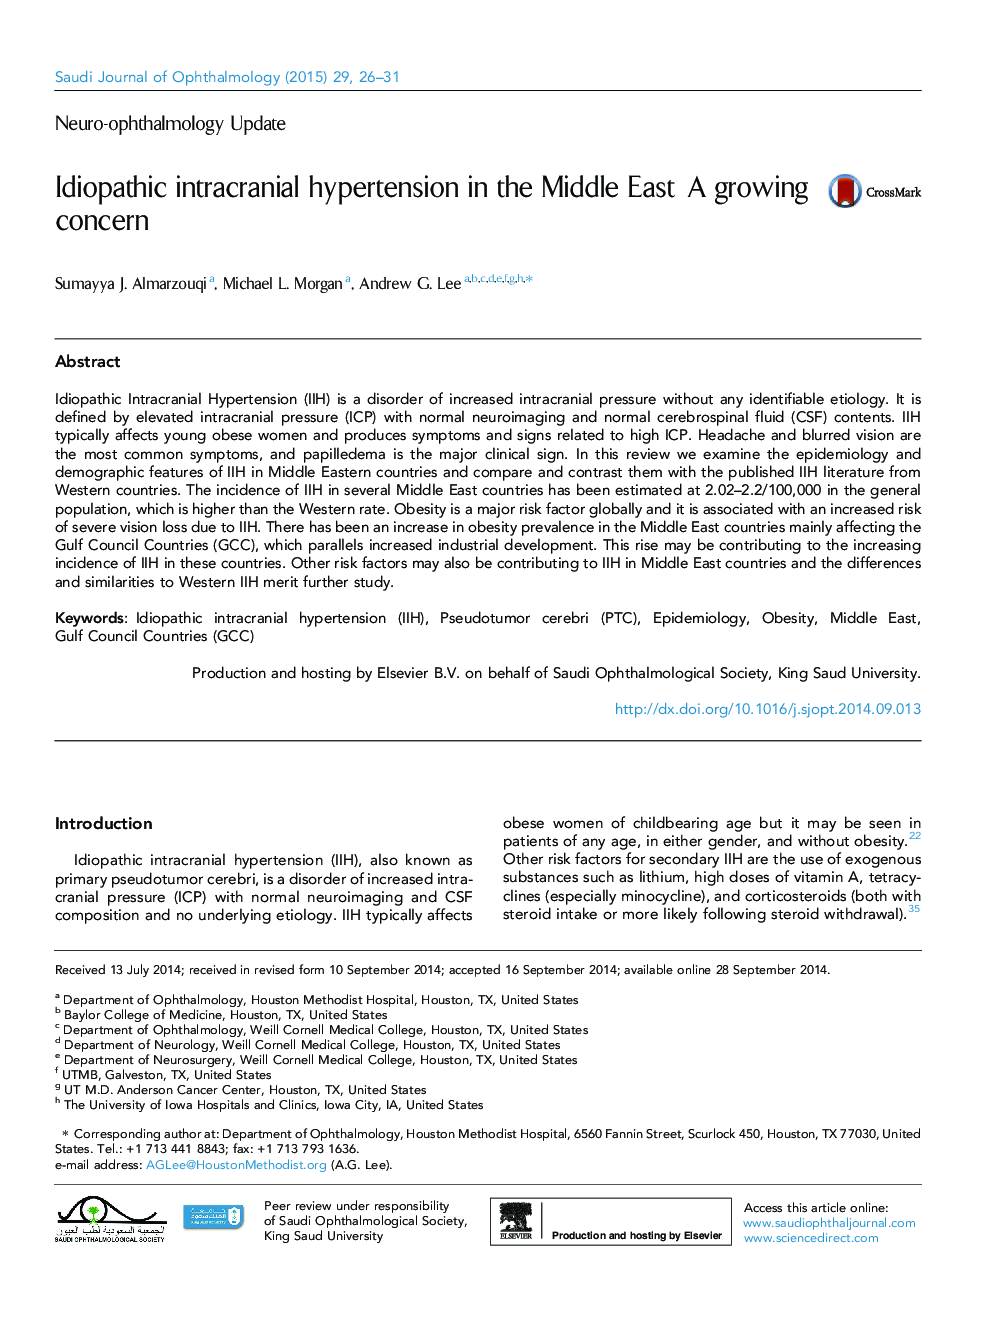 Idiopathic intracranial hypertension in the Middle East: A growing concern 